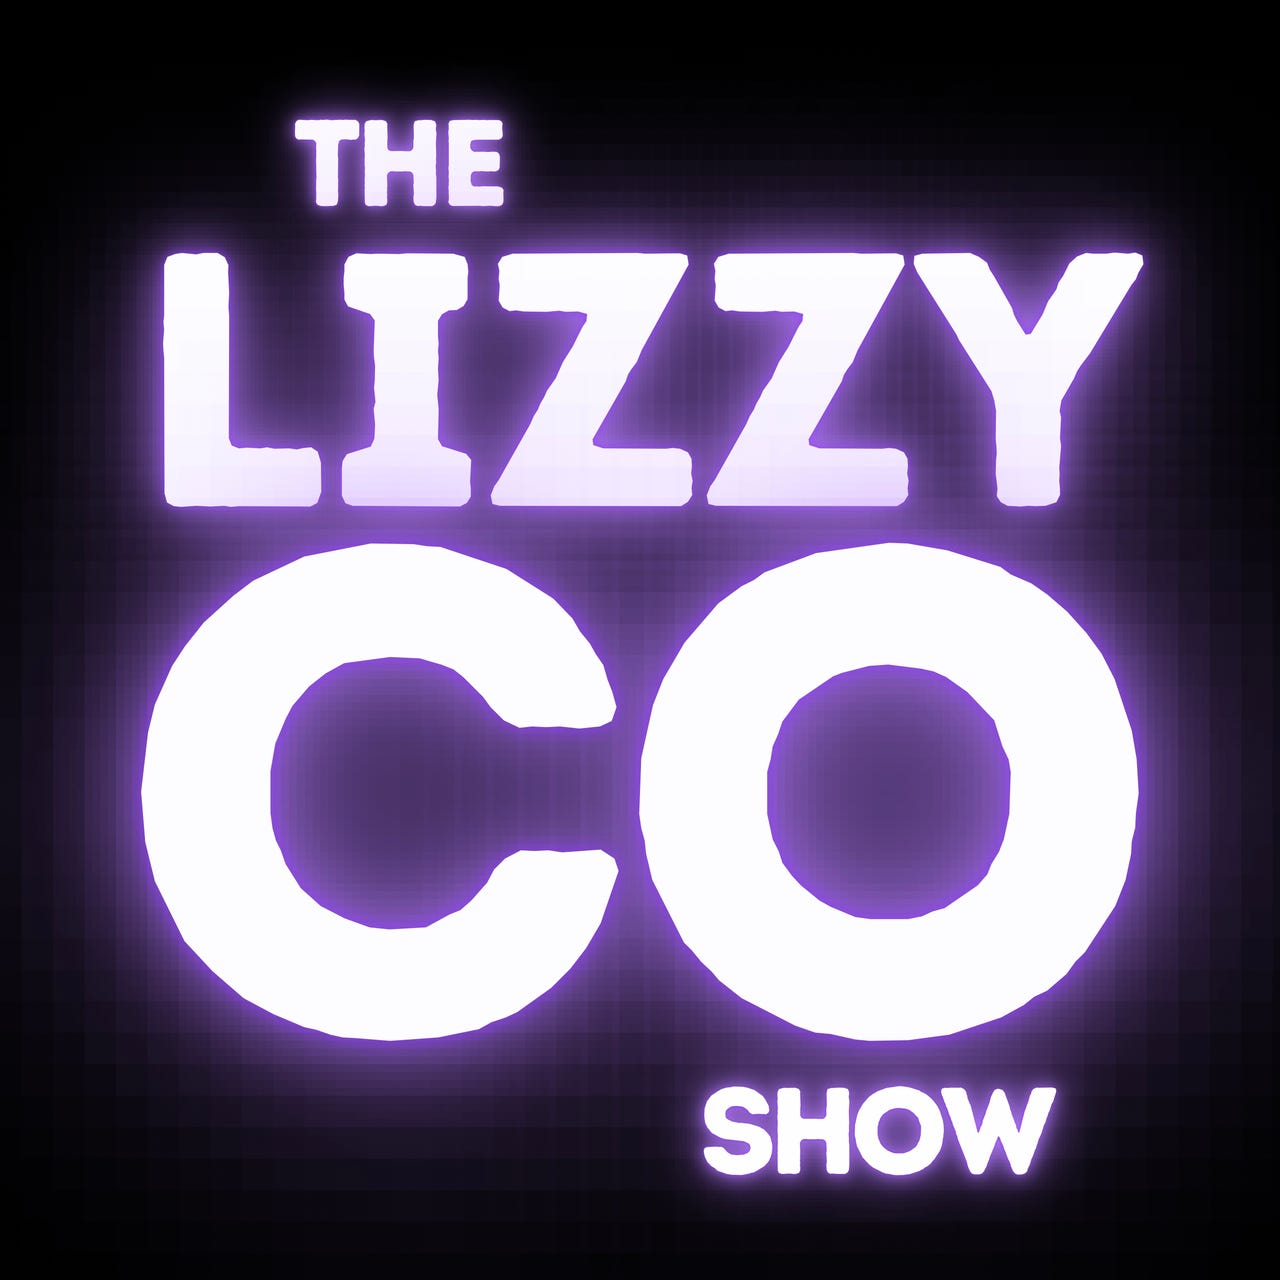 The Lizzy Co Show